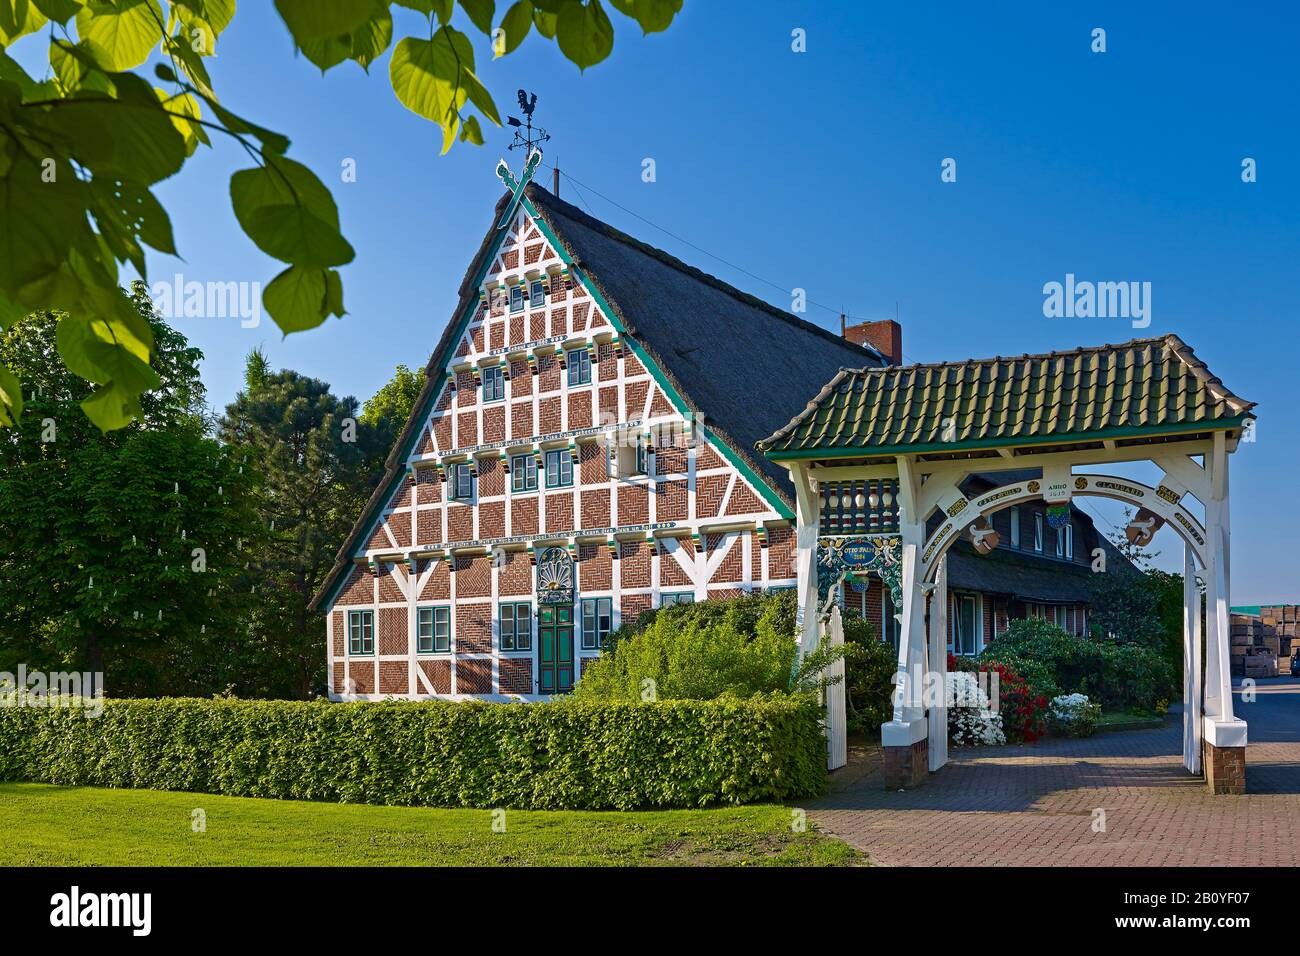 Altländer farm with magnificent gate in Neuenfelde, Altes Land, Hanseatic City of Hamburg, Germany, Stock Photo